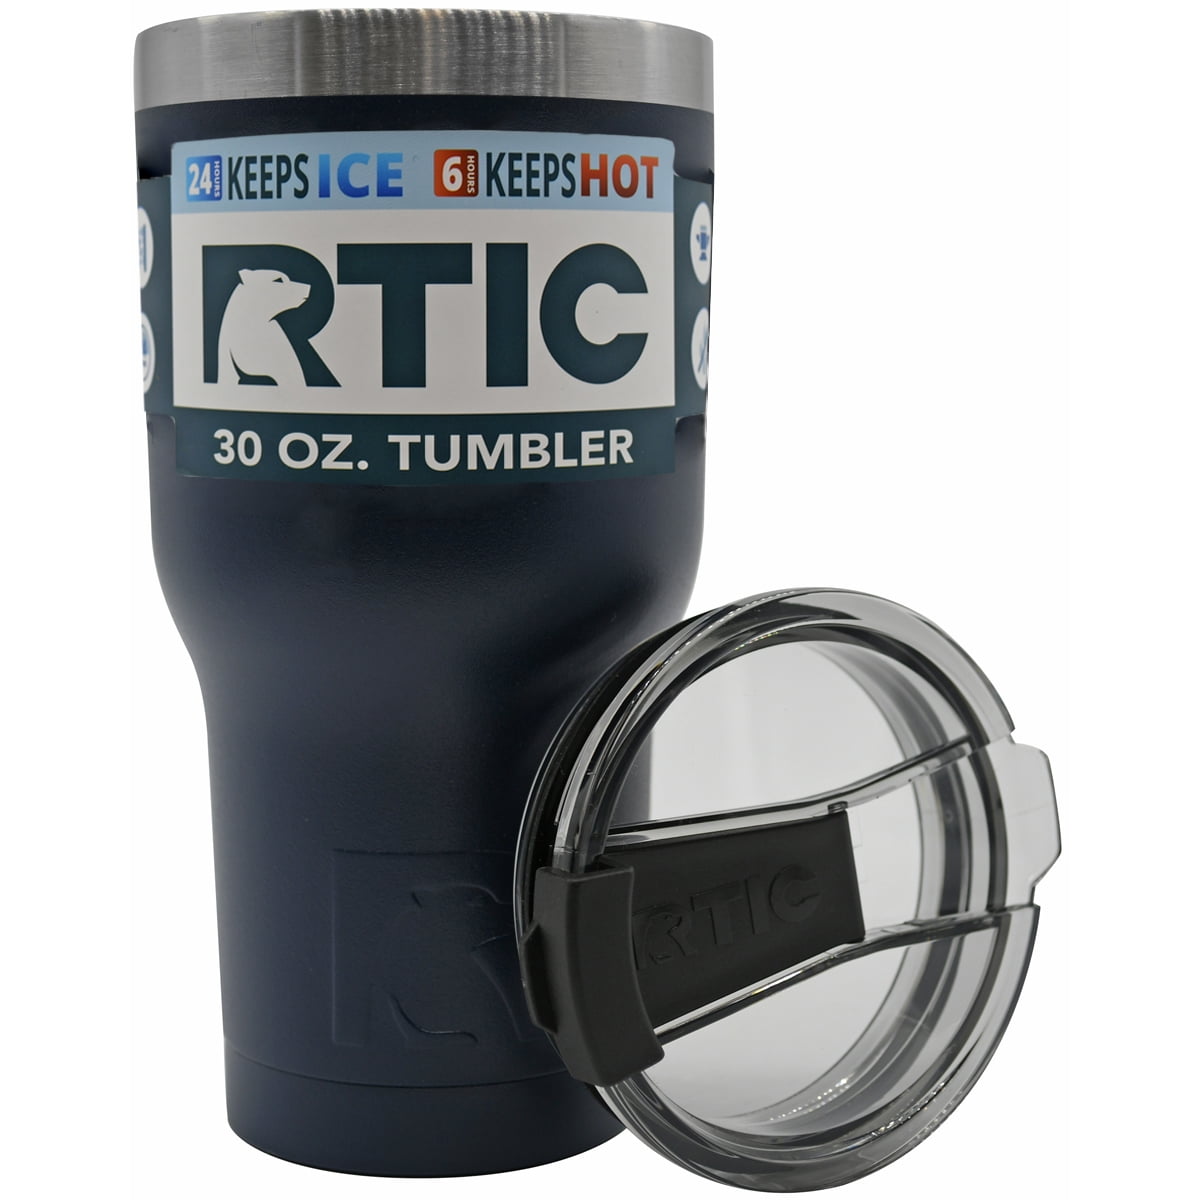 RTIC YOLO Insulated 20 oz. Cup - YOLO Watersports